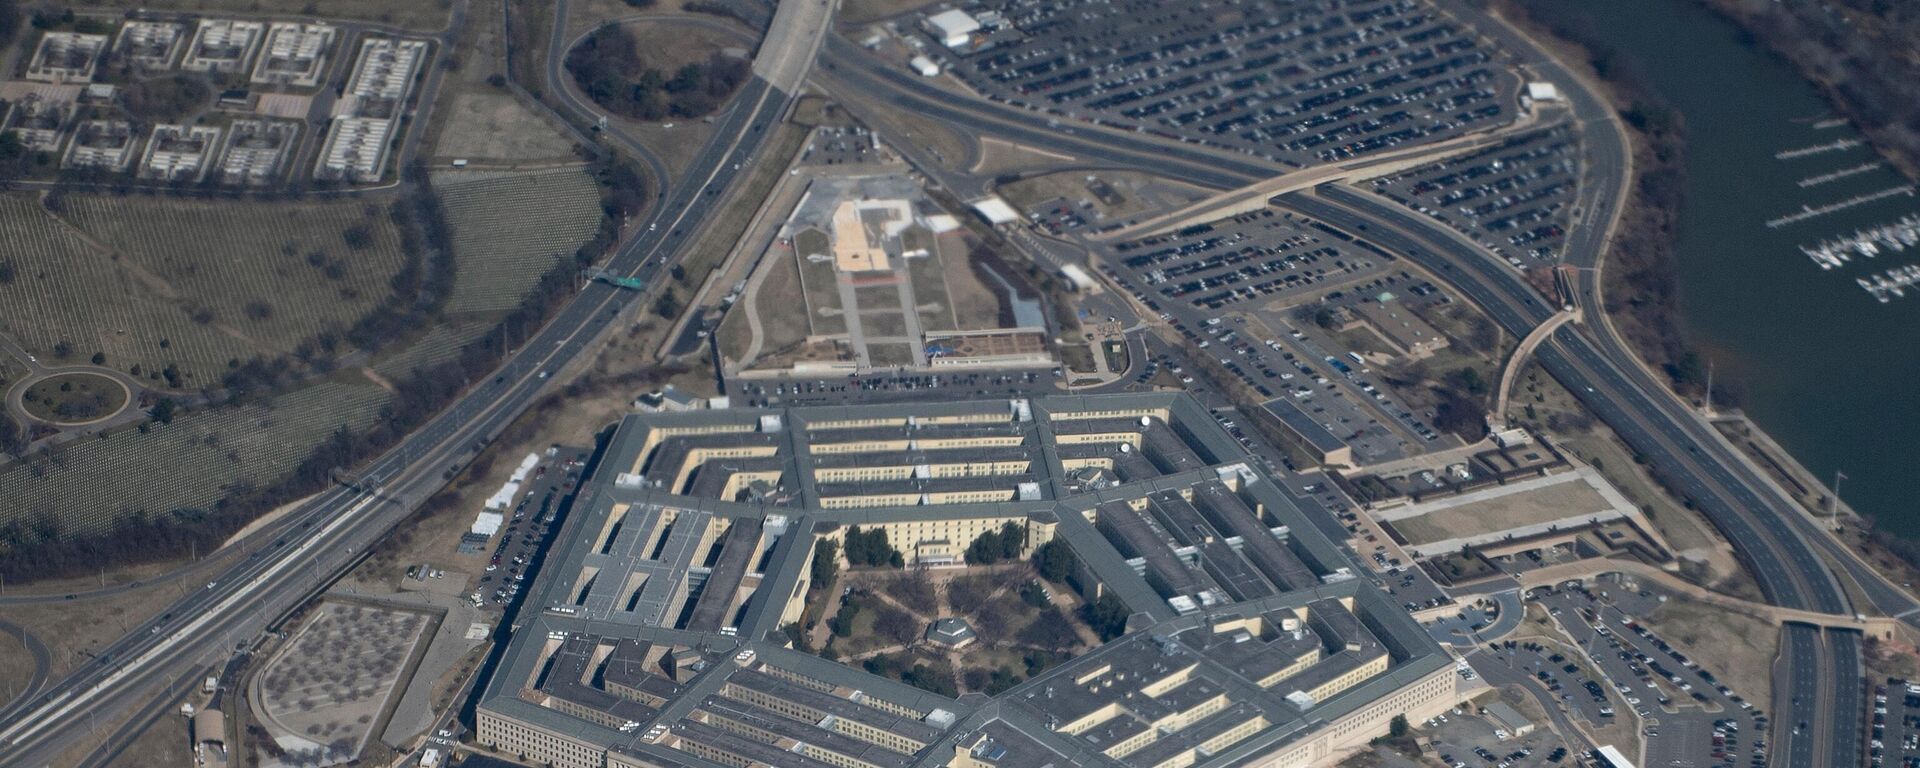 The Pentagon is seen from the air in Washington, DC, on March 2, 2022 - Sputnik International, 1920, 08.10.2023